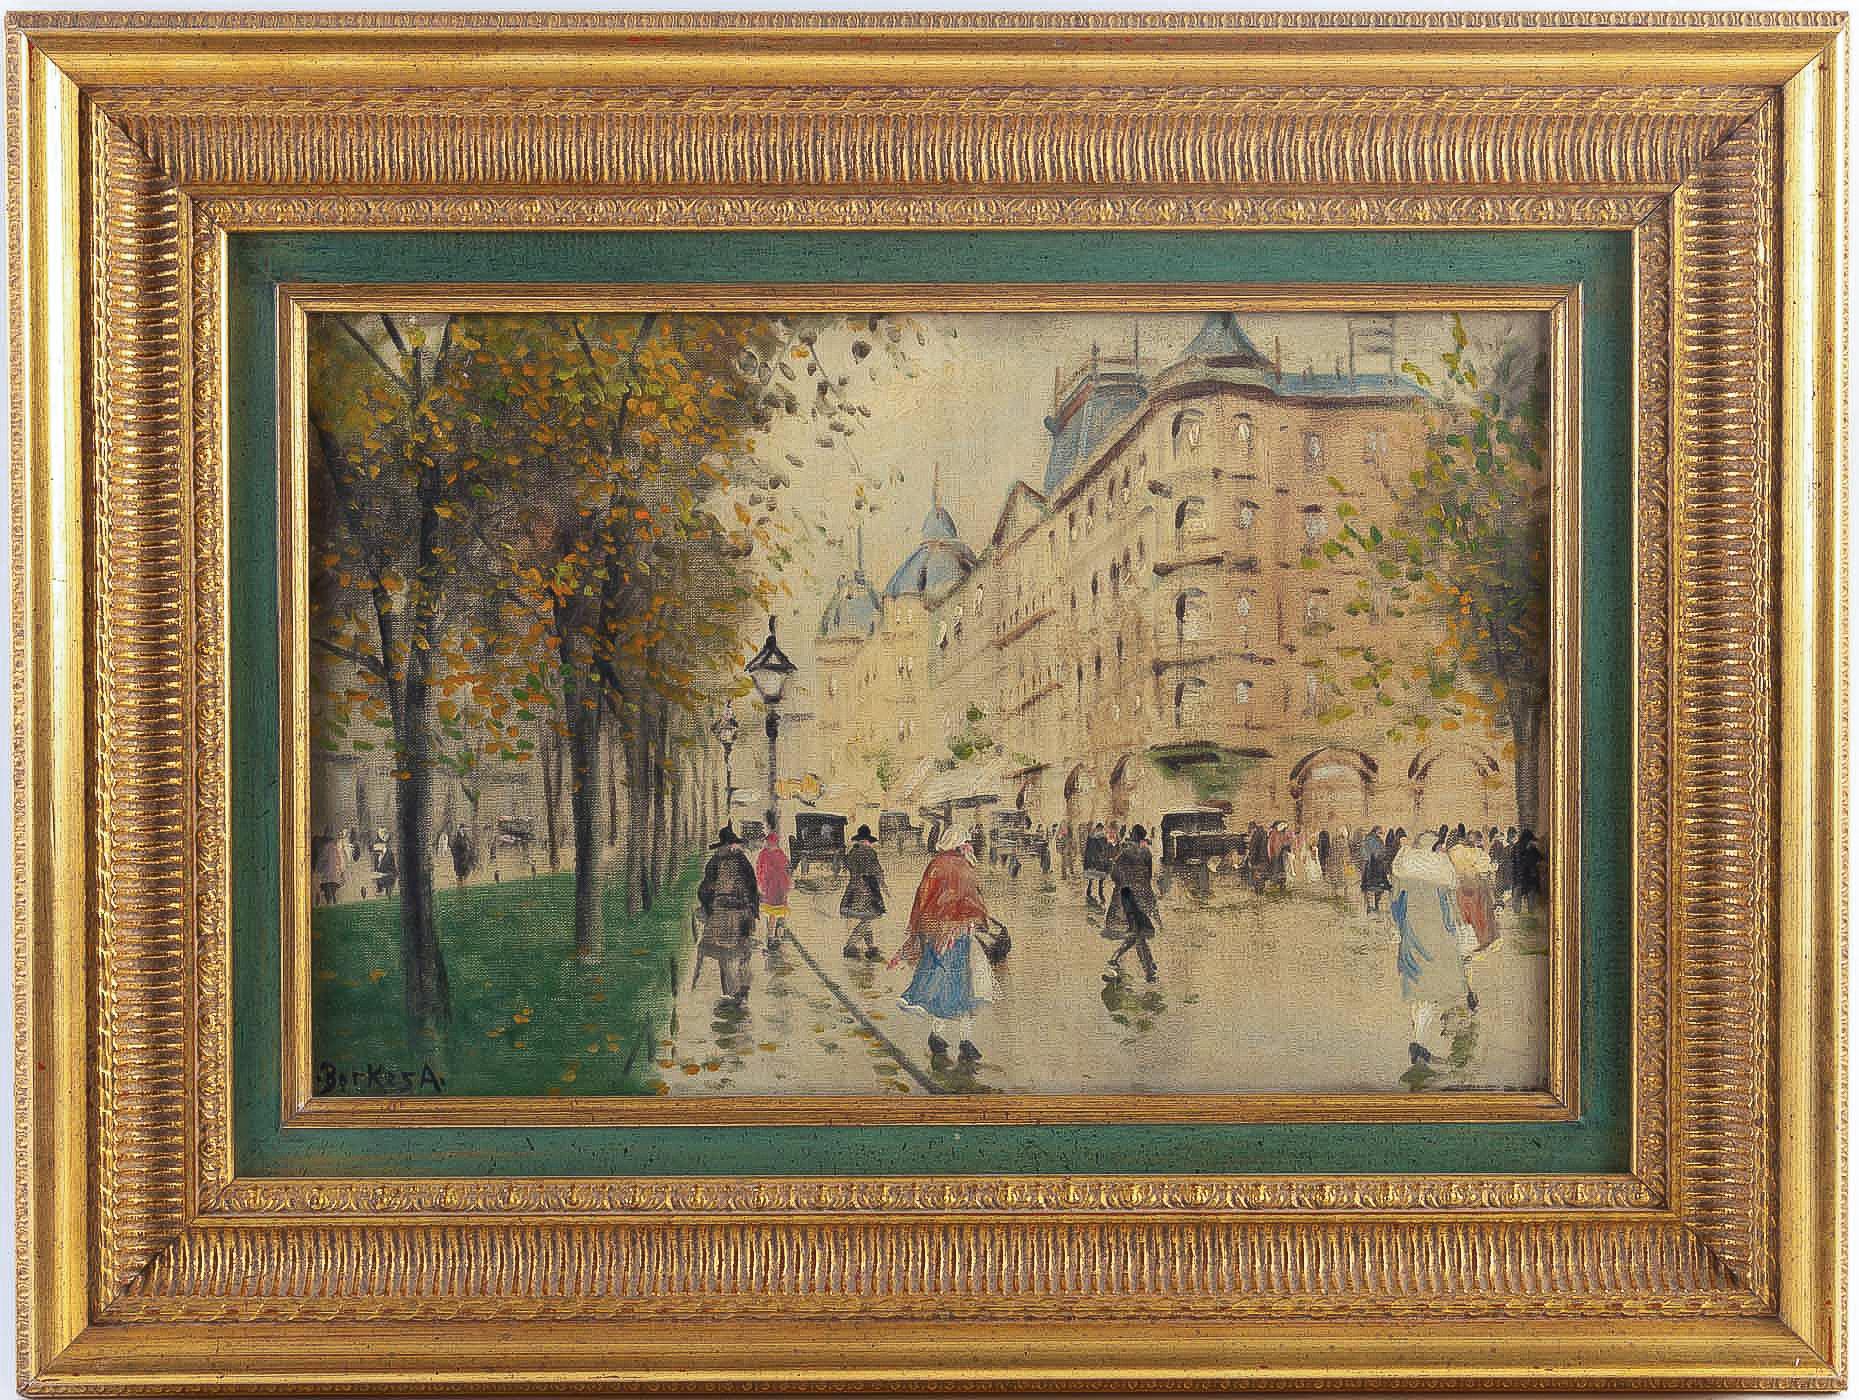 Antal Berkes pair of oil on canvas views of Paris, circa 1920.

A lovely and decorative pair of oil on canvas signed lower left by Antal Berkes, depicting Views of Paris.

Measurements unframed: W 10.03 in., H 15.35 in.
Measurements framed: W